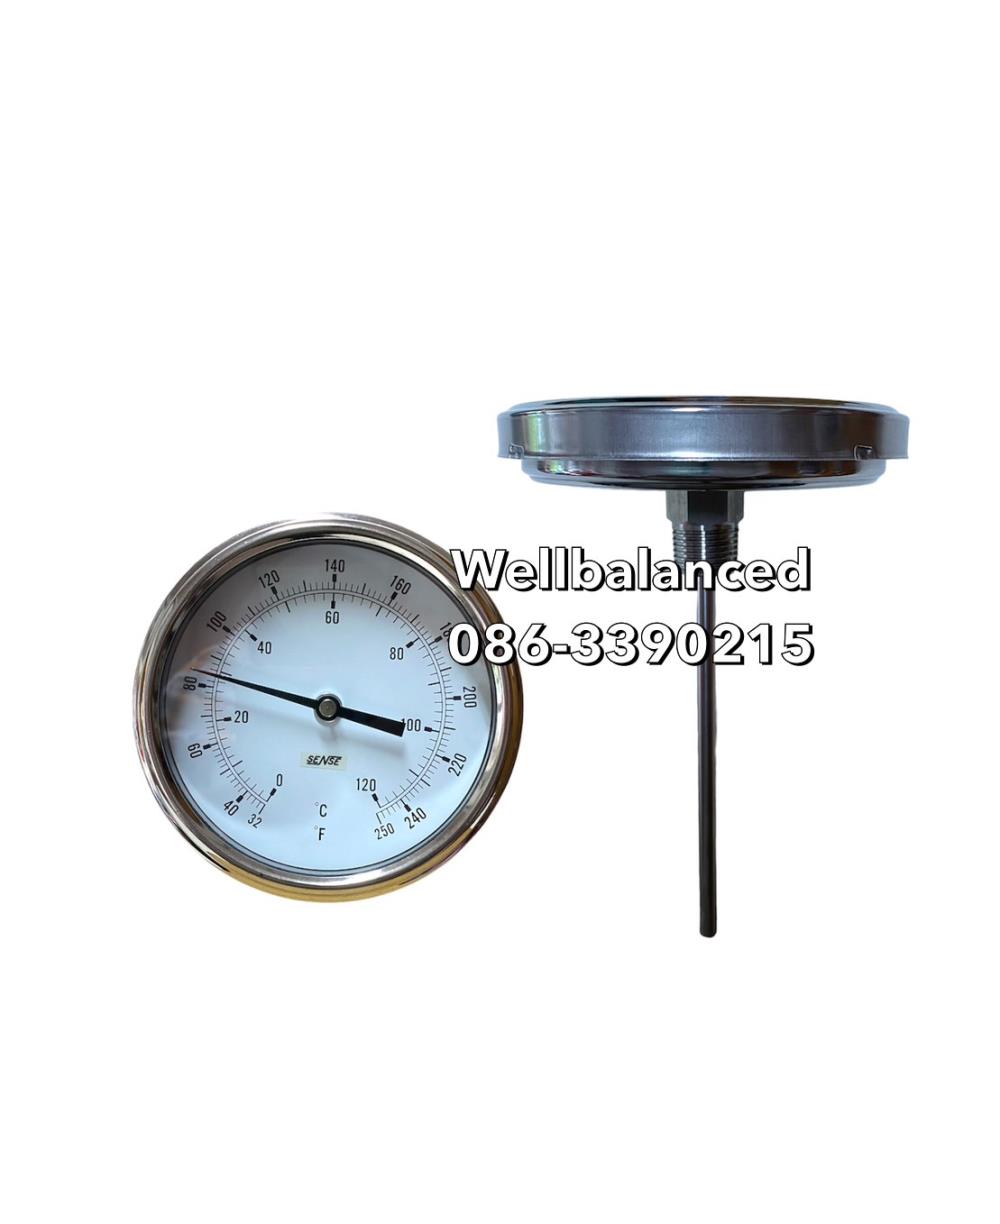 Thermometer Gauge (Temp gauge) 4" 0- 120 C,Thermometer Gauge (Temp gauge) 4" 0- 120 ?C,Thermometer Gauge (Temp gauge) 4" 0- 120 C,Instruments and Controls/Gauges